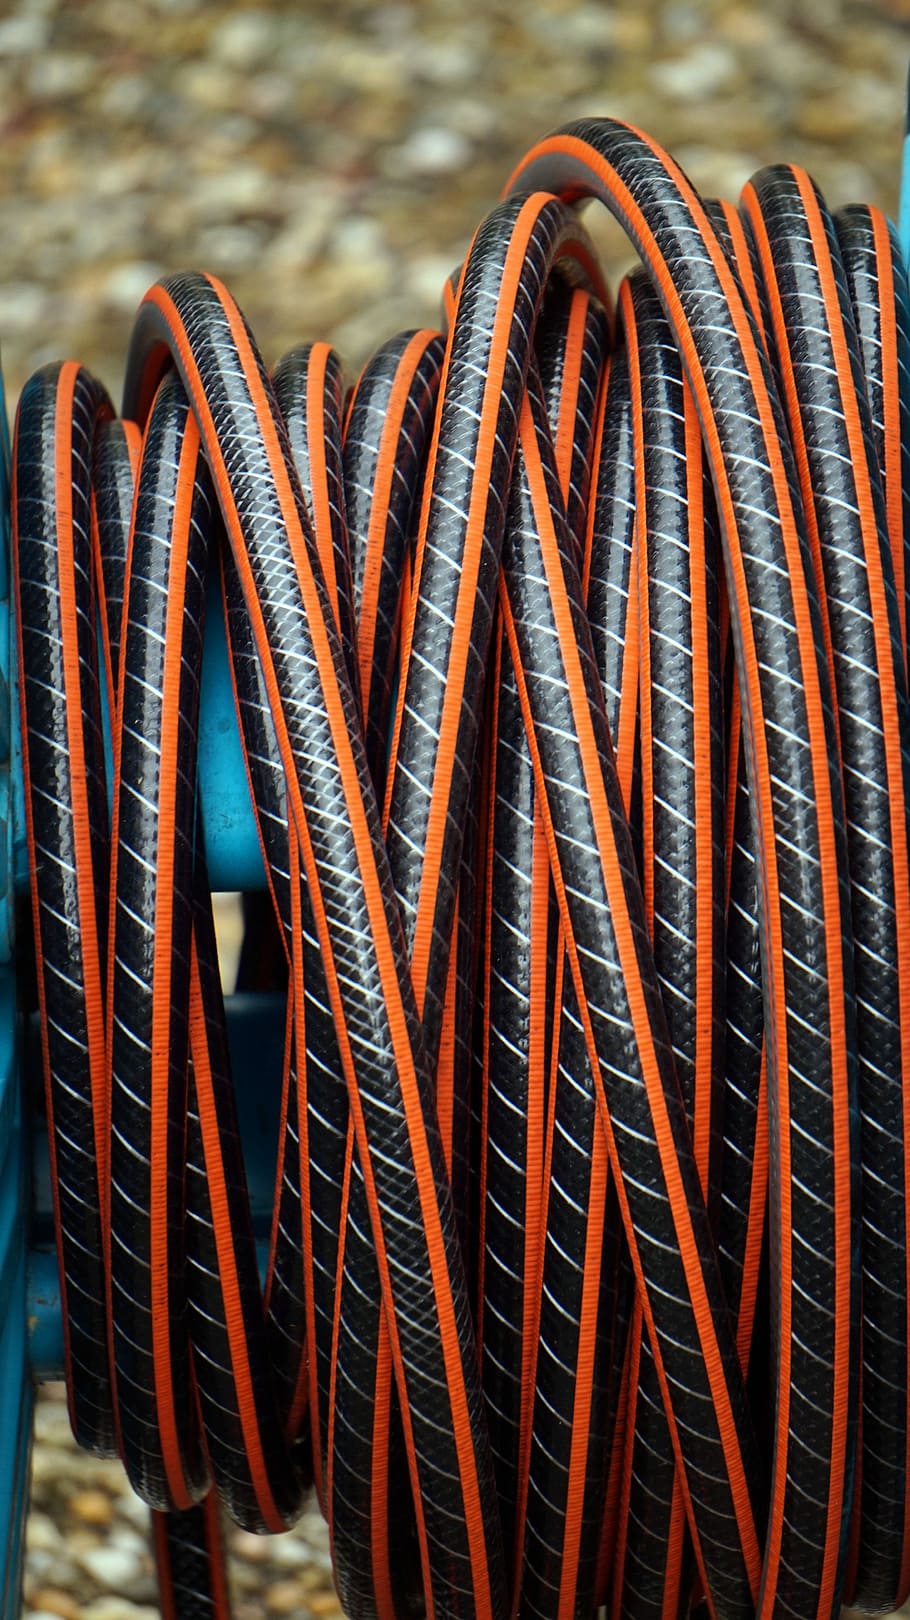 garden, hose, water, garden hose, metal, close-up, focus on foreground, pattern, spiral, cable